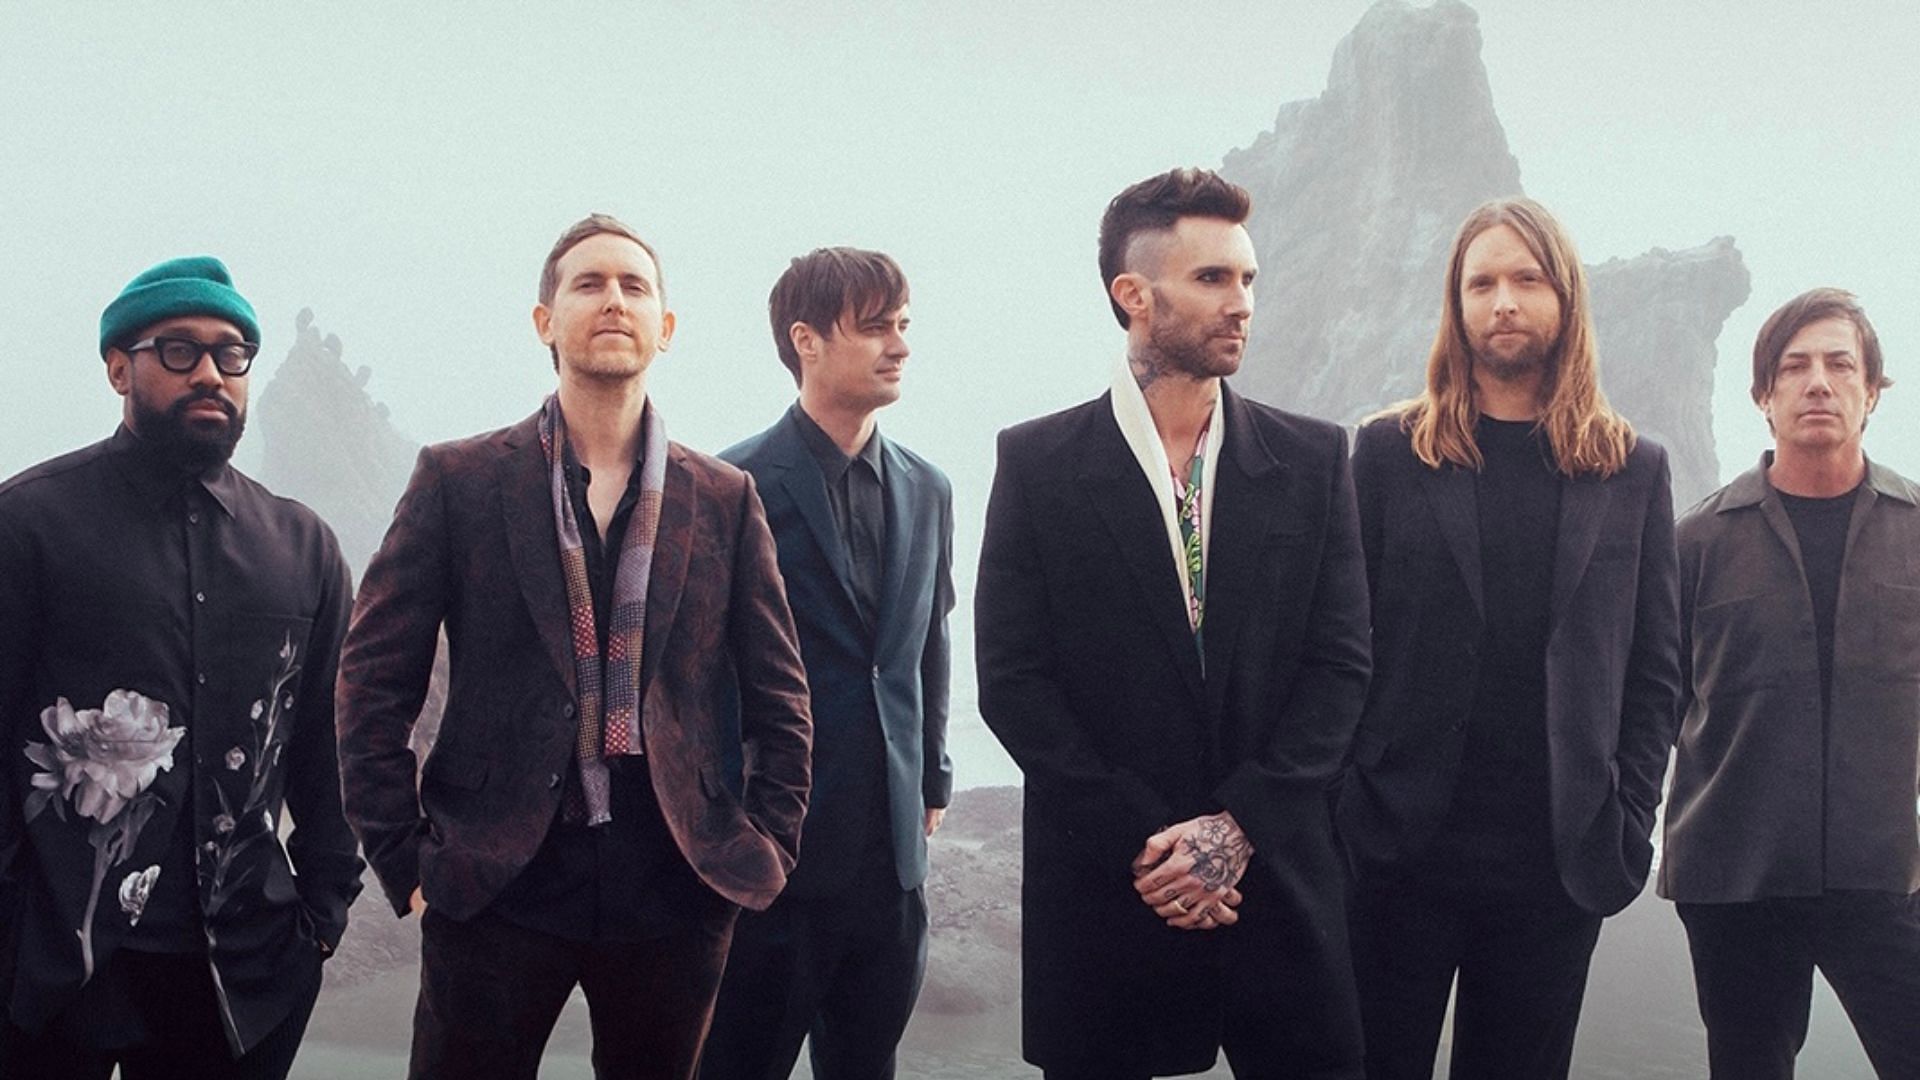 A still of the American pop rock band (Image via @maroon5/Twitter)